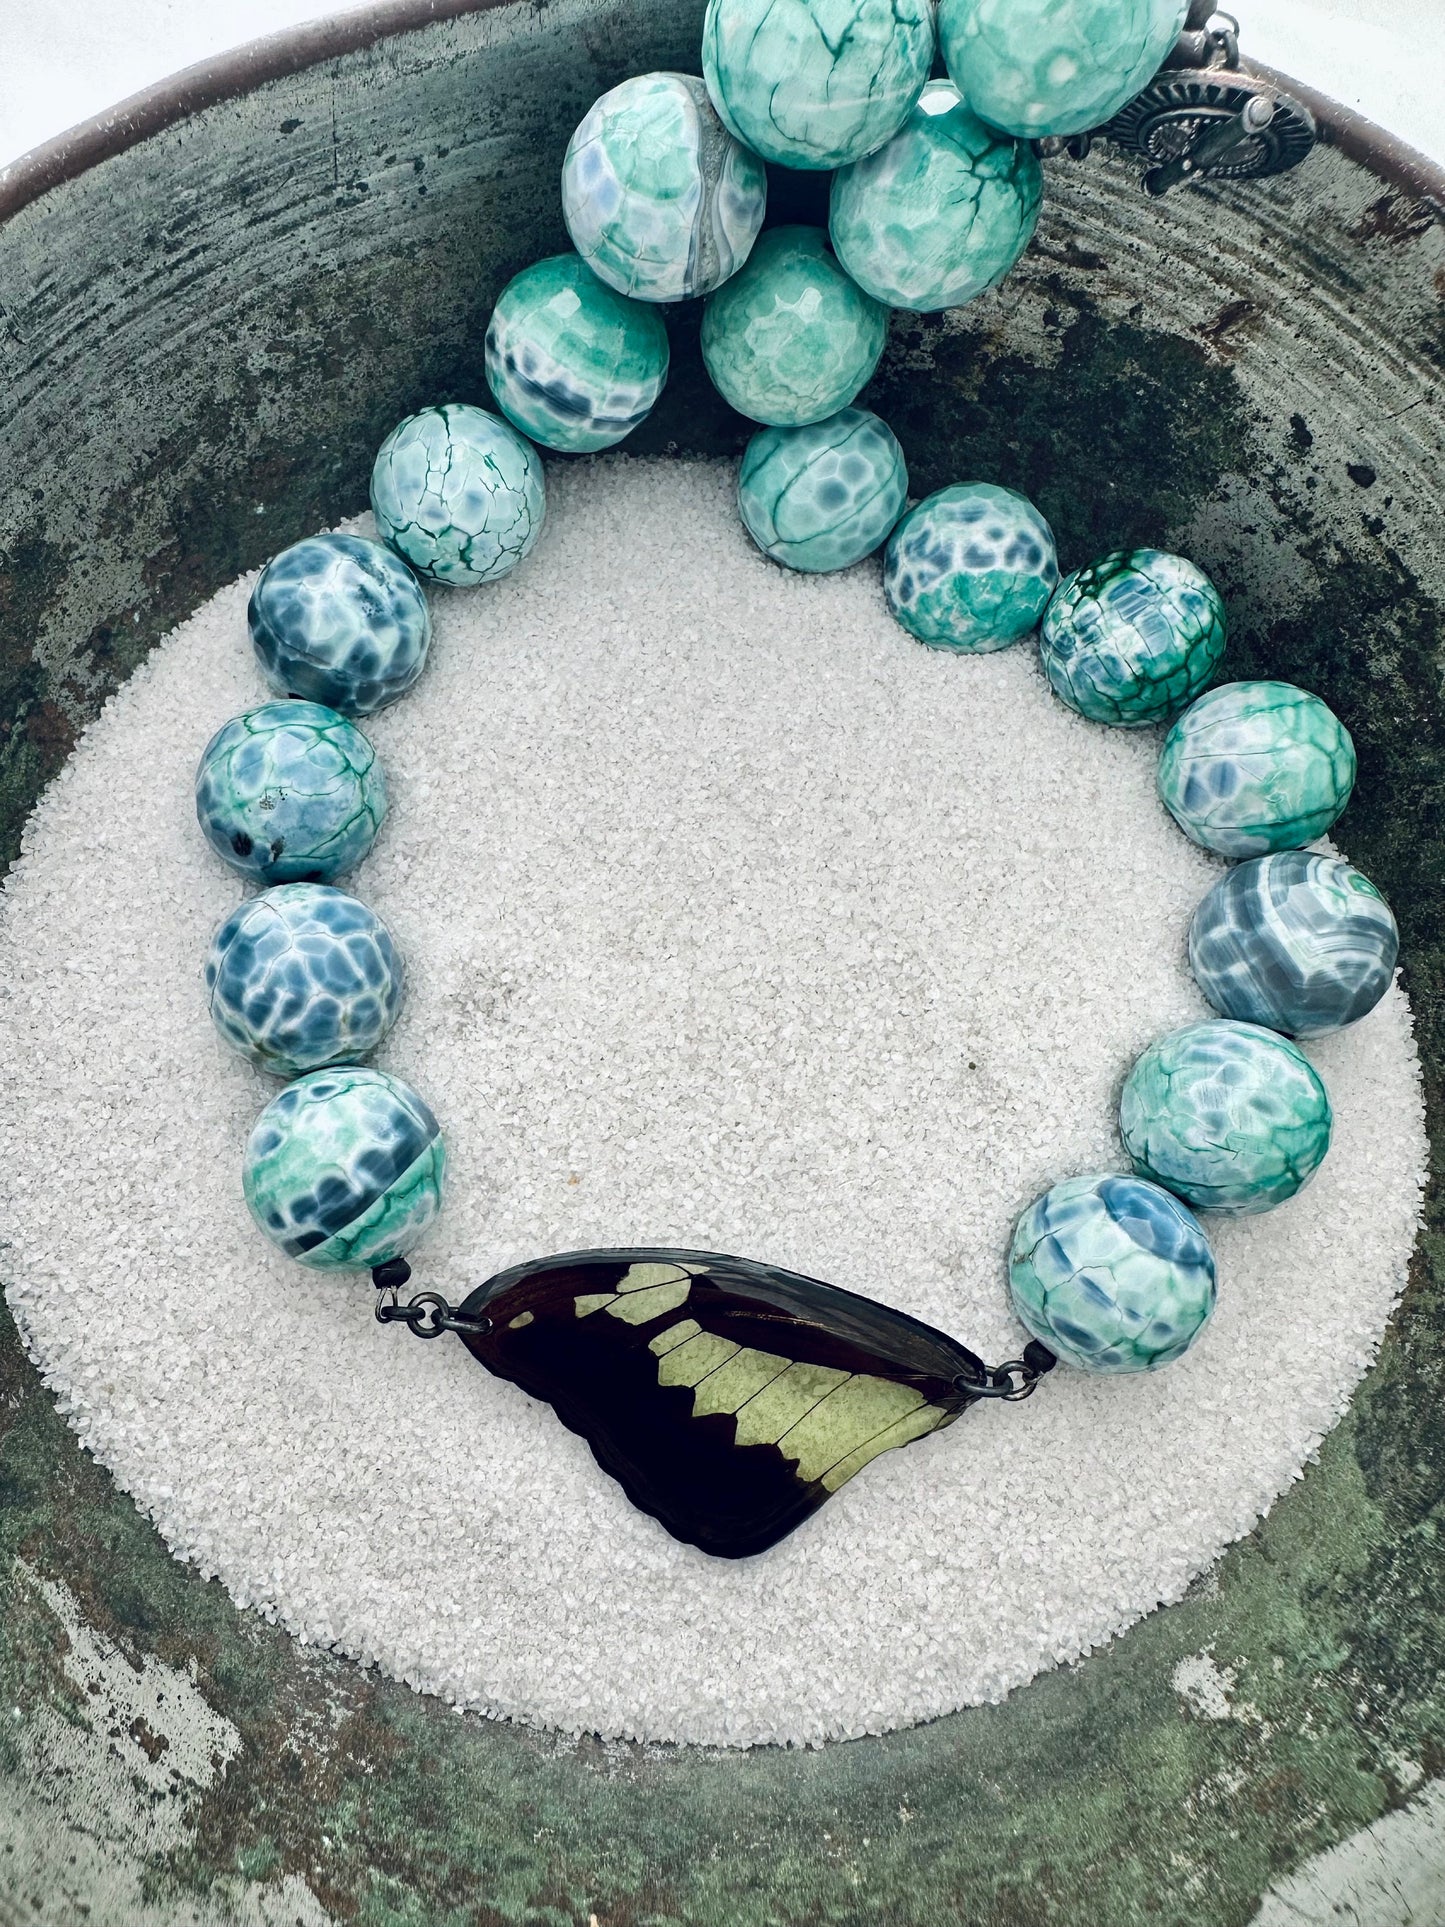 Real Green Apple Swallowtail Butterfly Necklace (Papilio phorcas) with Giant Faceted Blue Lace Agate Beads and Sterling Silver